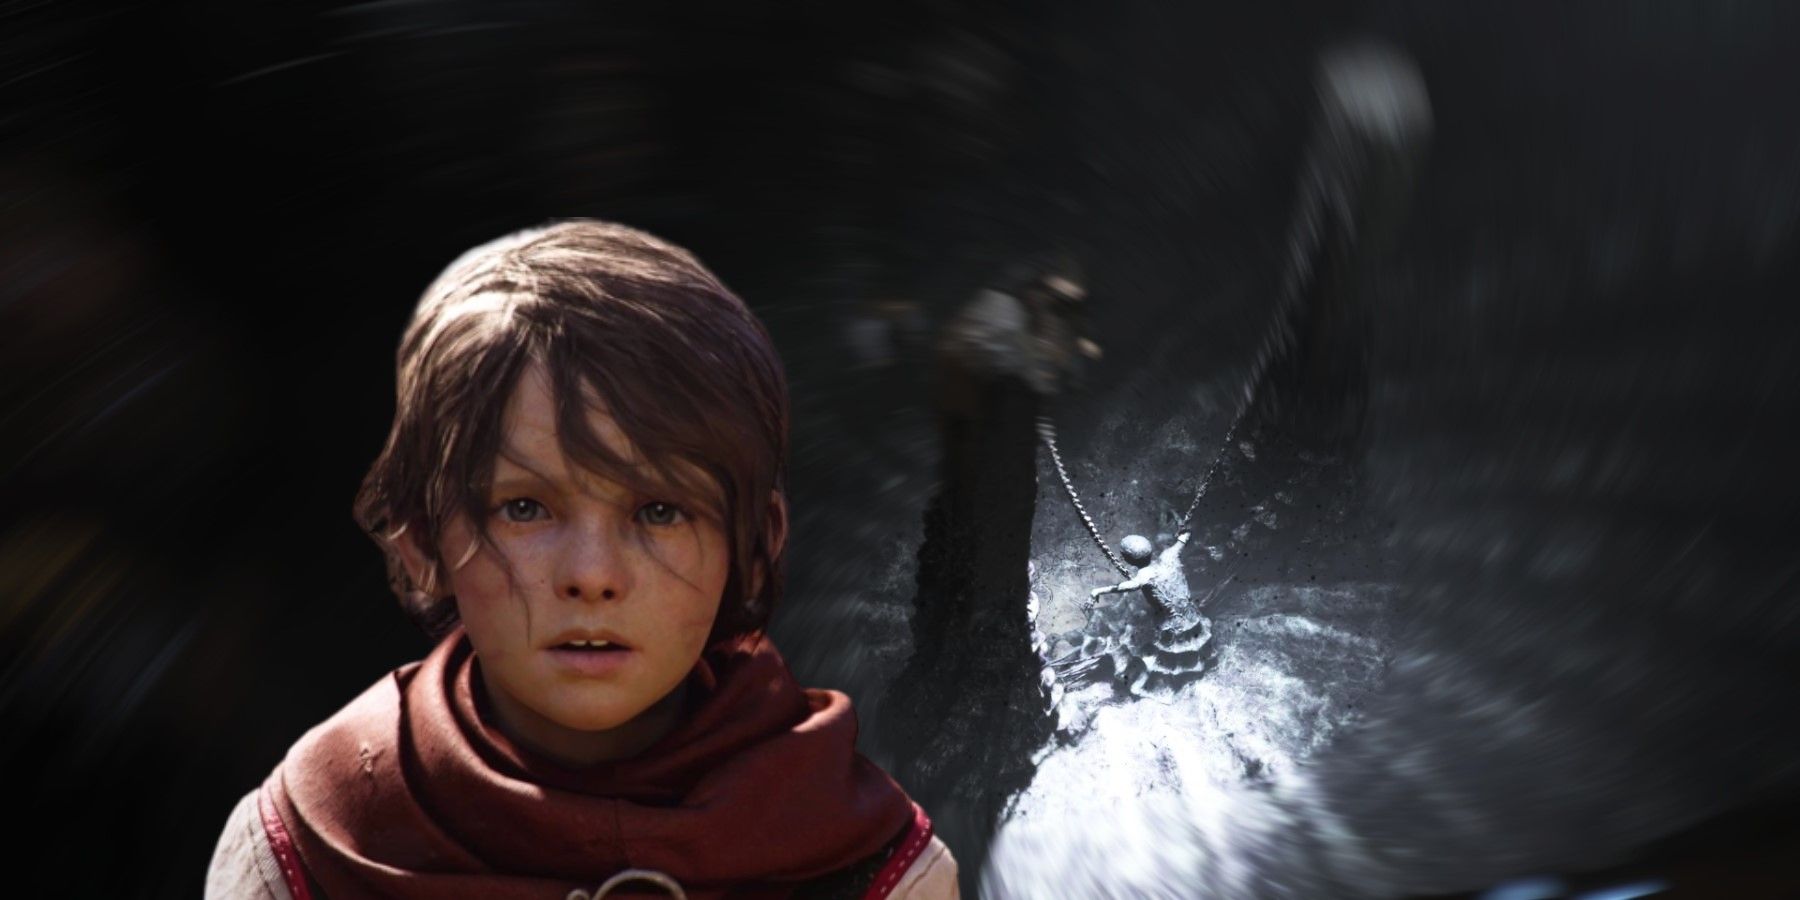 Why A Plague Tale: Requiem's Ending Could Be Setting Up a Sci-Fi Threequel